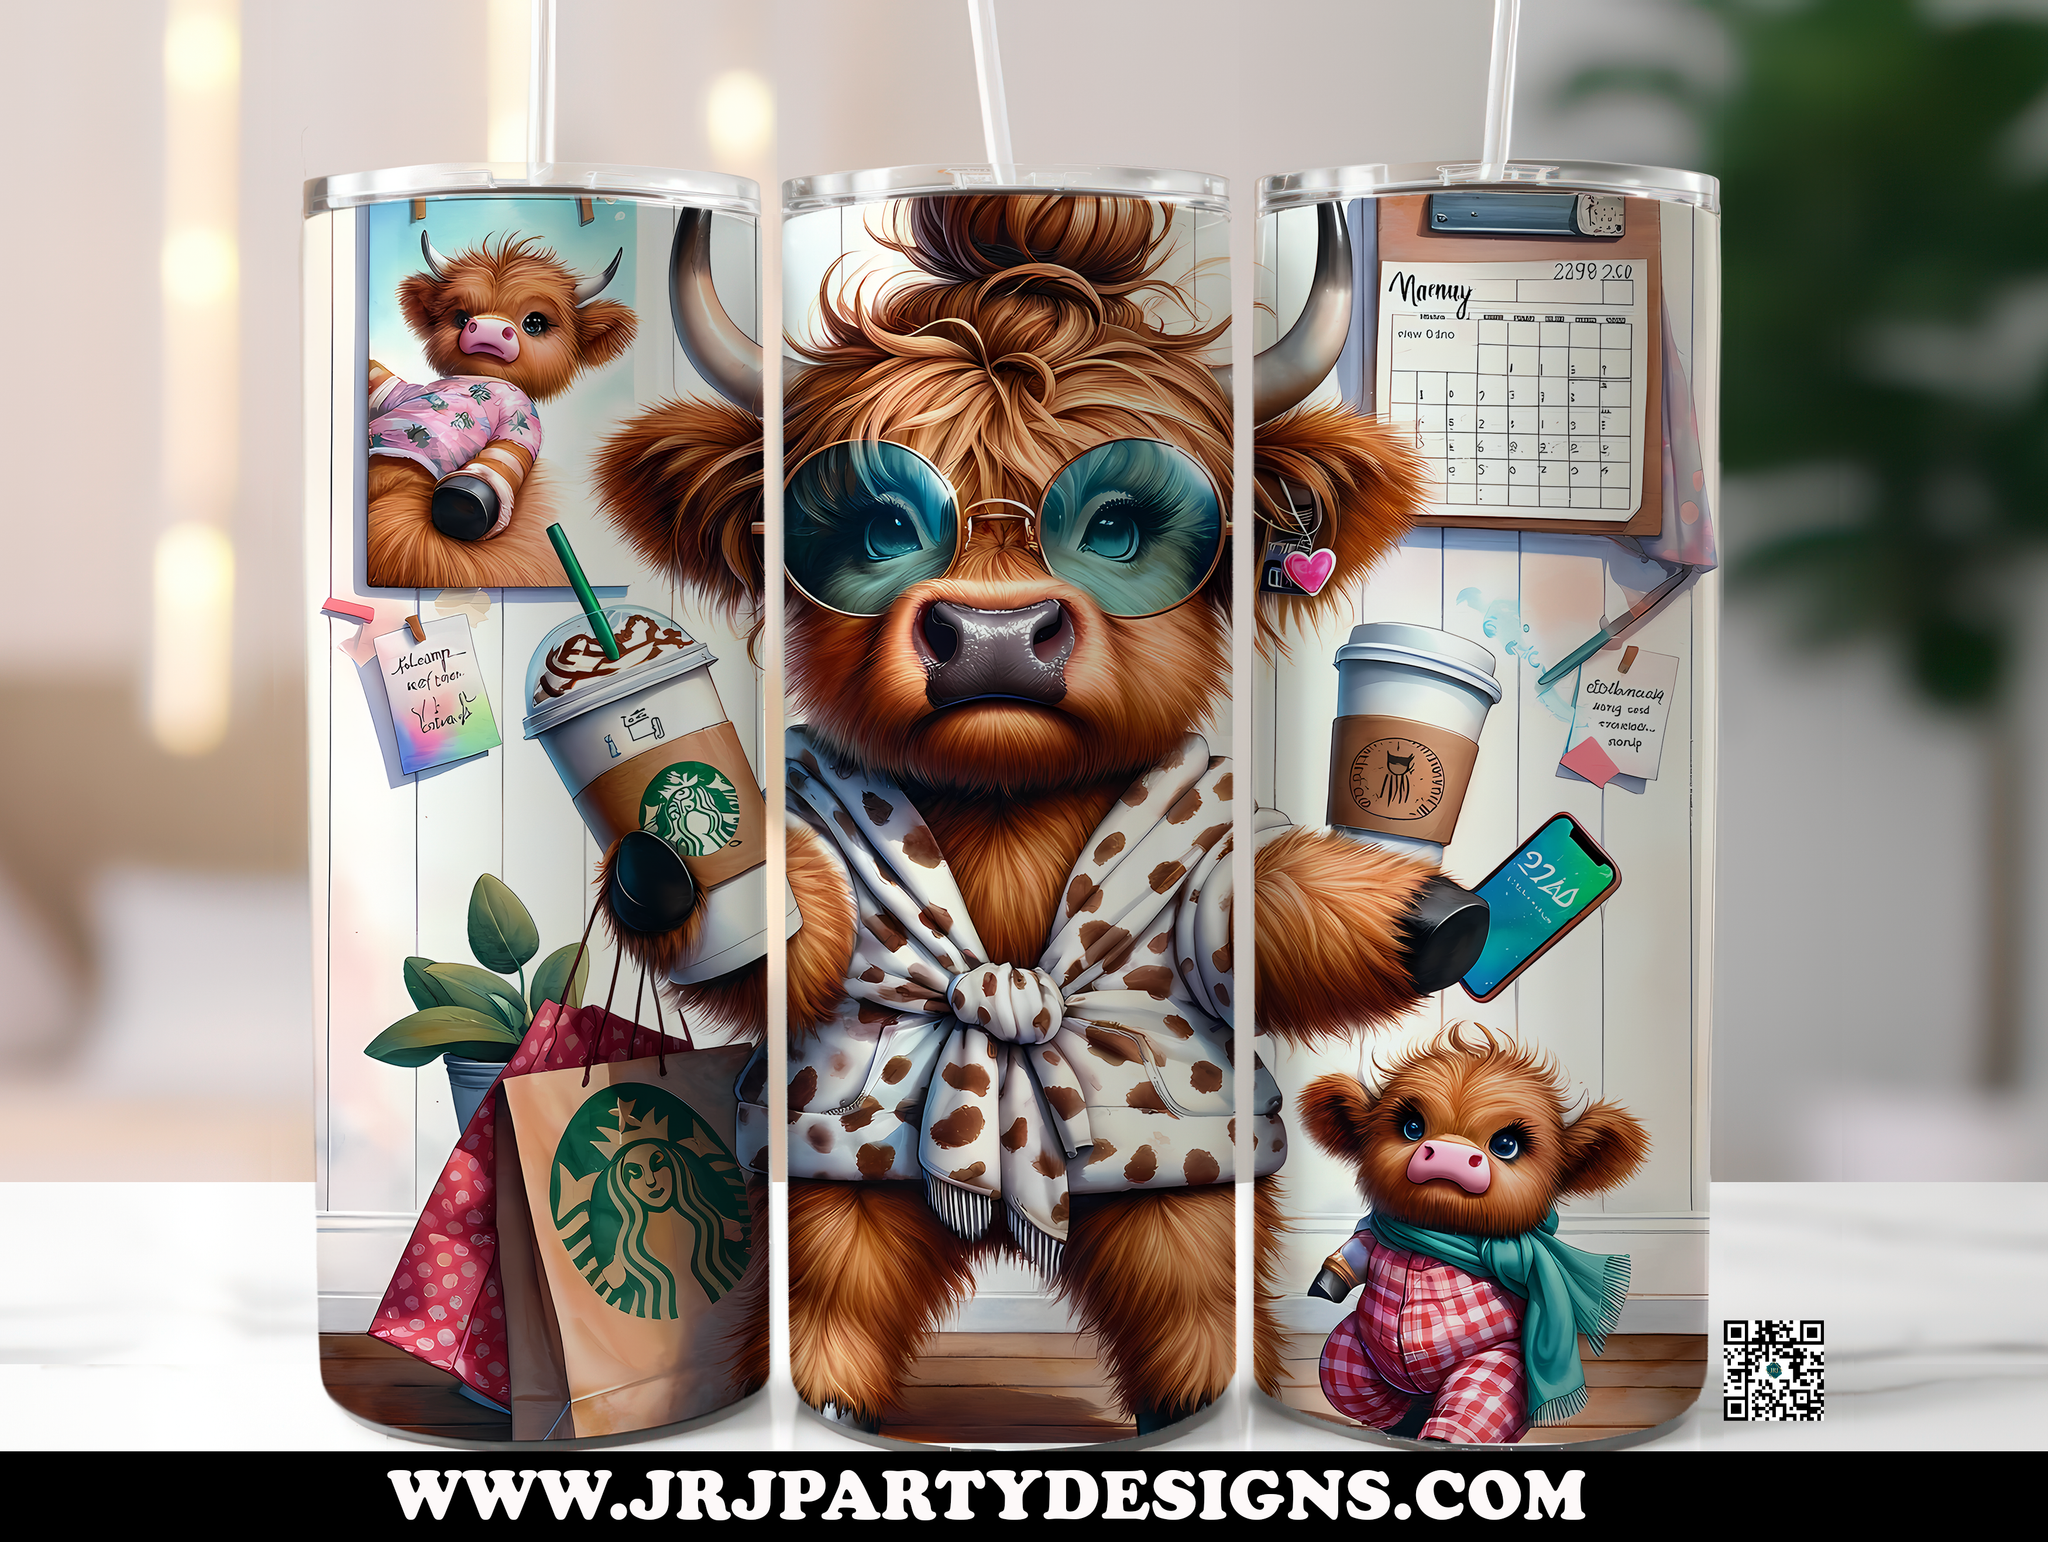 Hot Mess Mom Highland Cow Tumbler, lovable Highland Cow character embracing the hot mess lifestyle with fun details that resonate with moms on the go, Personalizing your coffee tumbler, unique gift for a fellow coffee lover, signature tumbler, Starbucks Cup, Starbucks coffee, Starbucks Mom, Starbucks Frappe, Starbucks Tumbler, Personalized Starbucks Cup, Custom Starbucks Tumbler